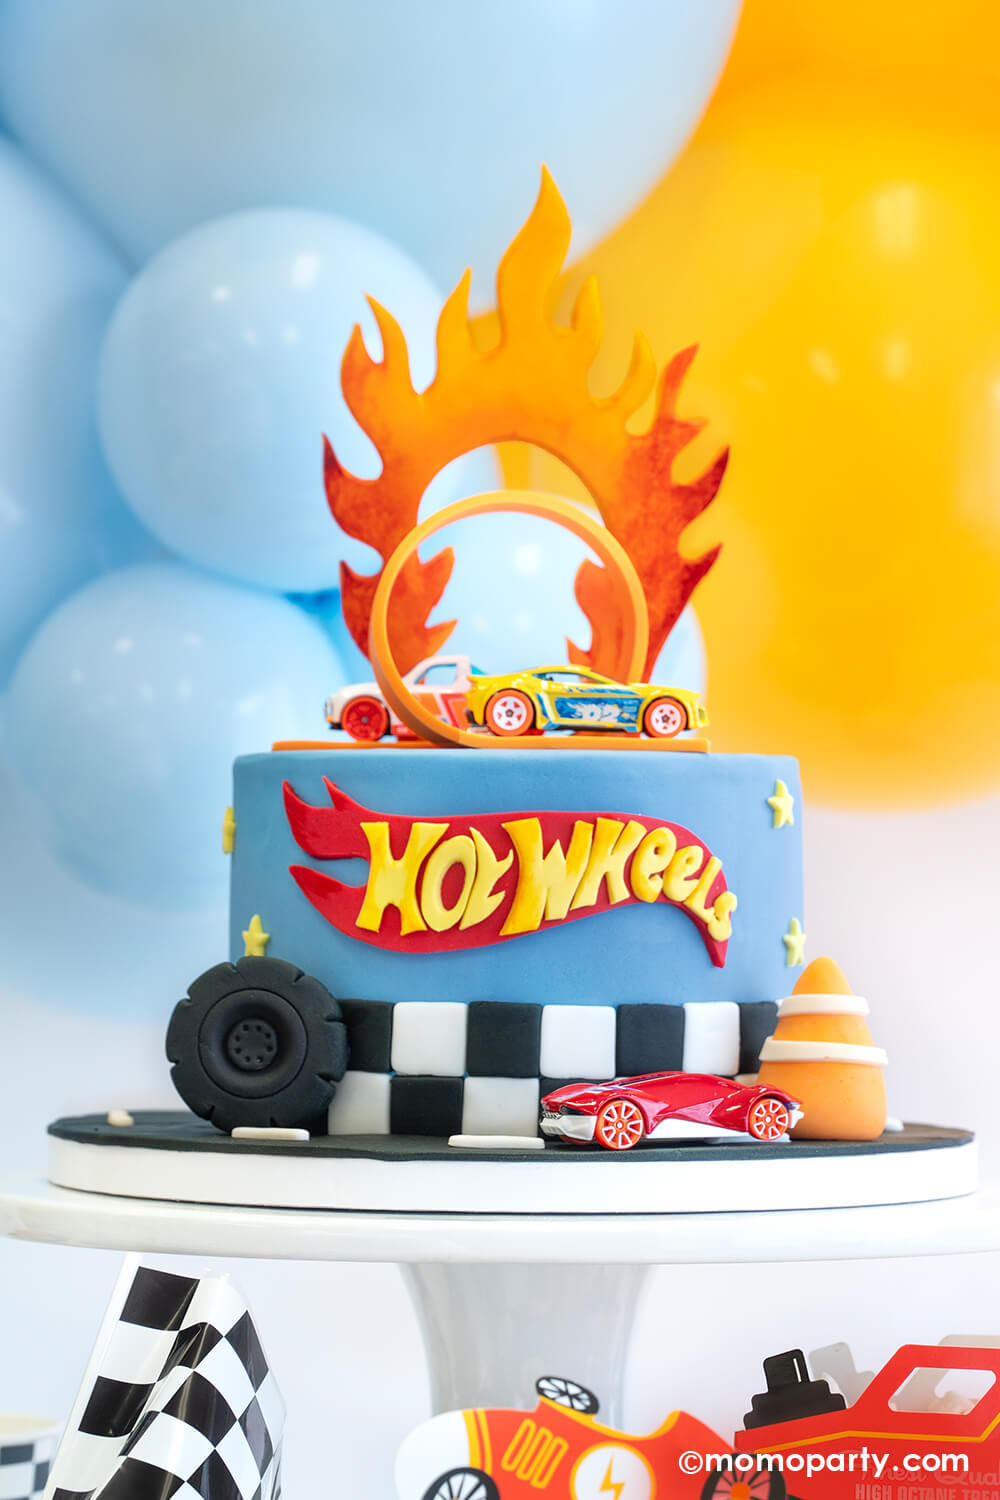 Hot Wheels themed birthday cake with the classic orange curve track and Hot Wheels toy cars by Momo Party. On the side of the cake are a fondant wheel and construction cone, making this a perfect look for kid's Hot Wheels themed birthday party.